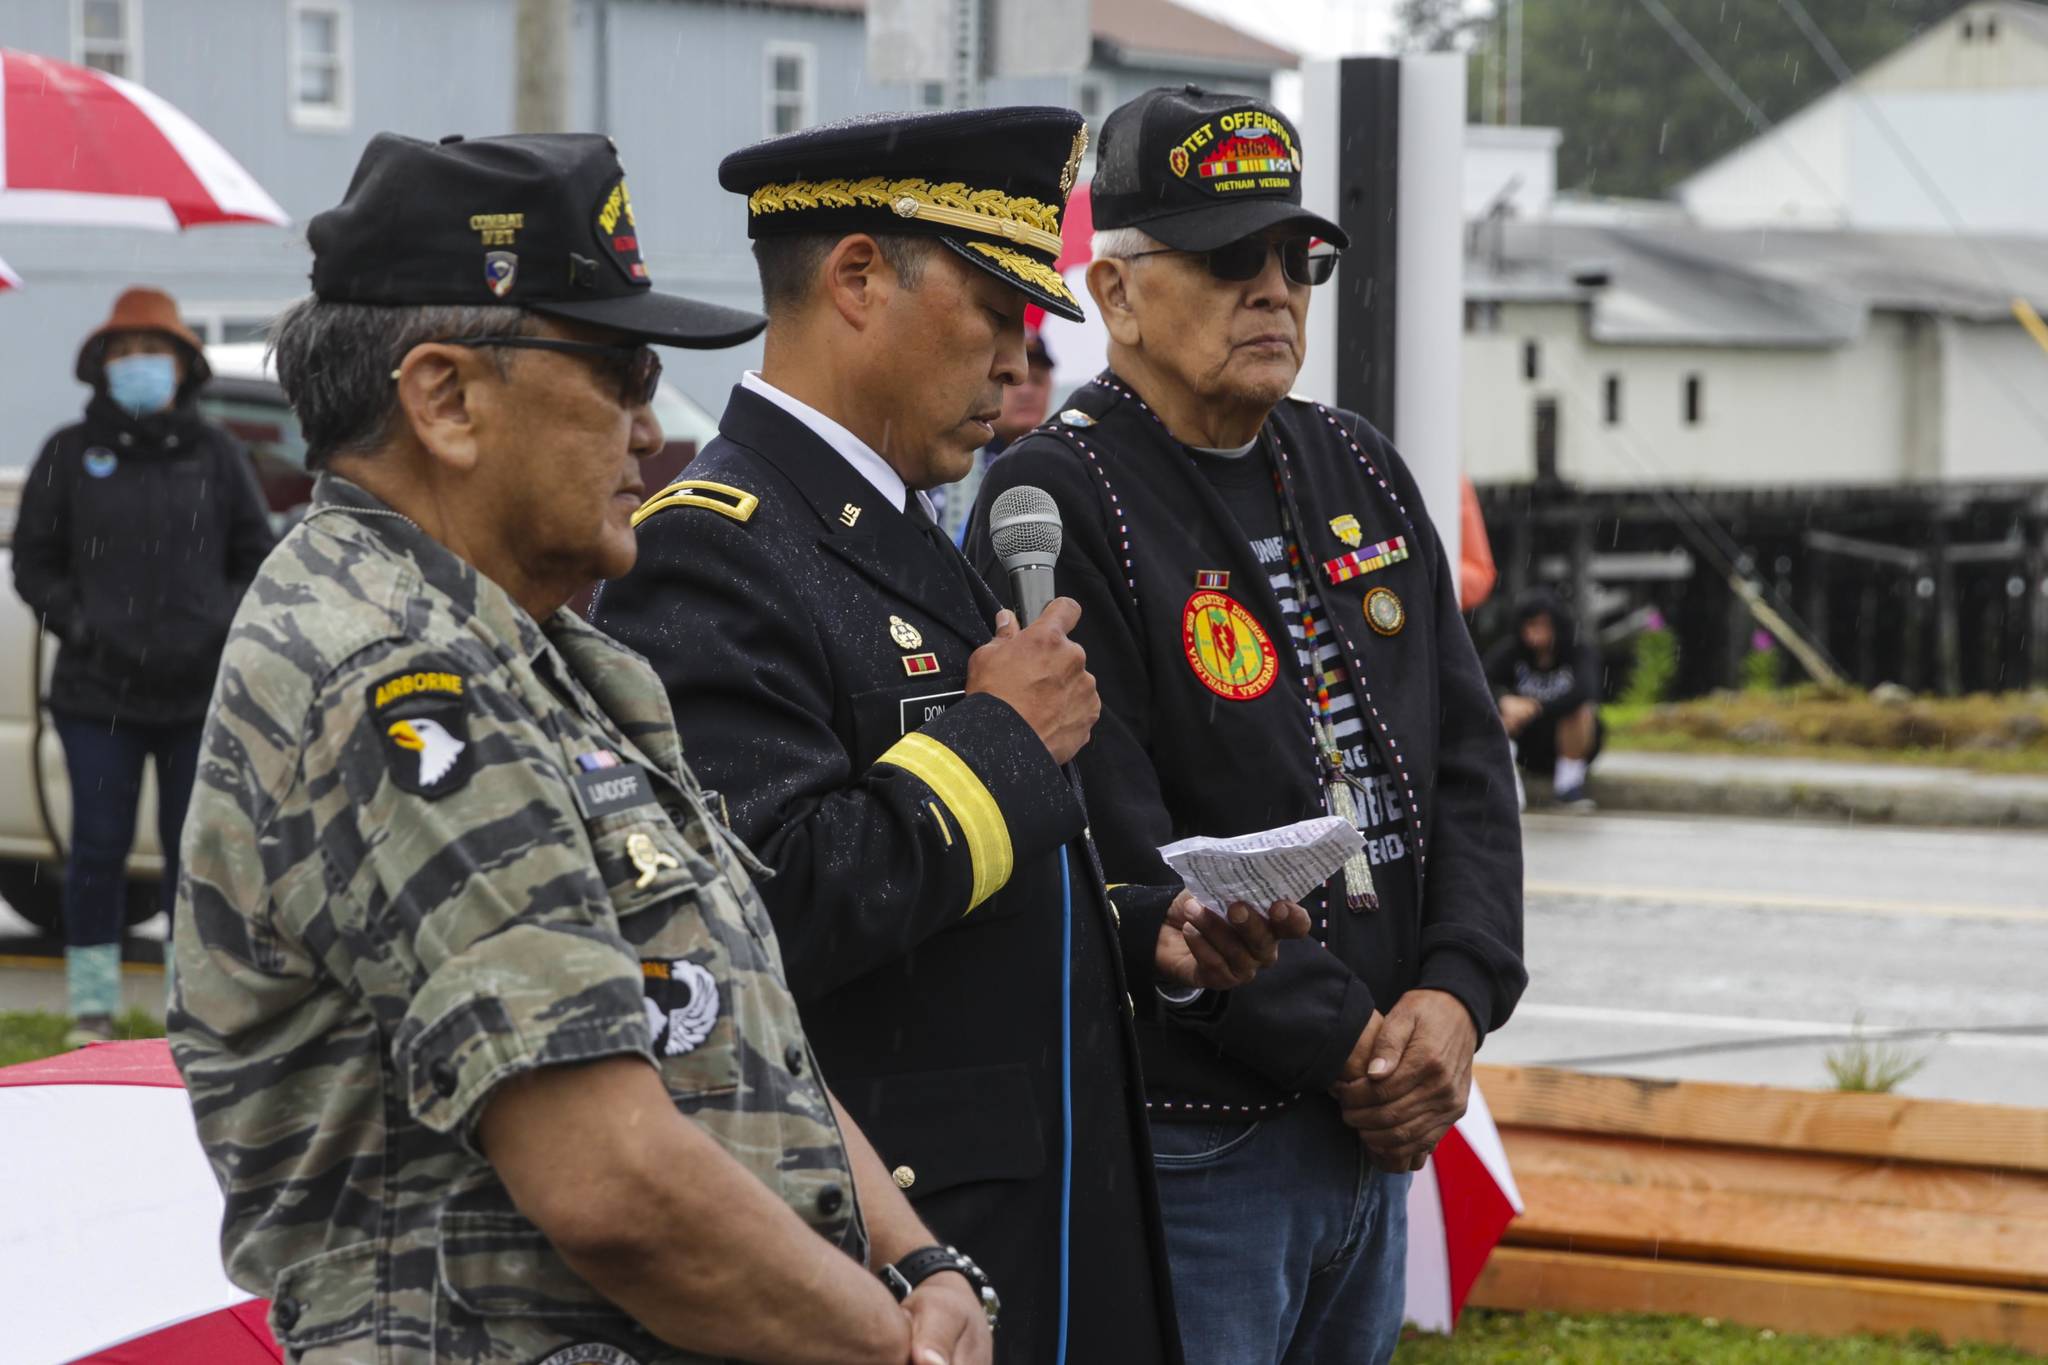 Brig. Gen. Wayne Don, currently the highest-ranked Alaska Native in the armed services, speaks during a ceremony for the raising of a totem pole honoring veterans of the armed services in Hoonah on July 24, 2021. (Michael S. Lockett / Juneau Empire)